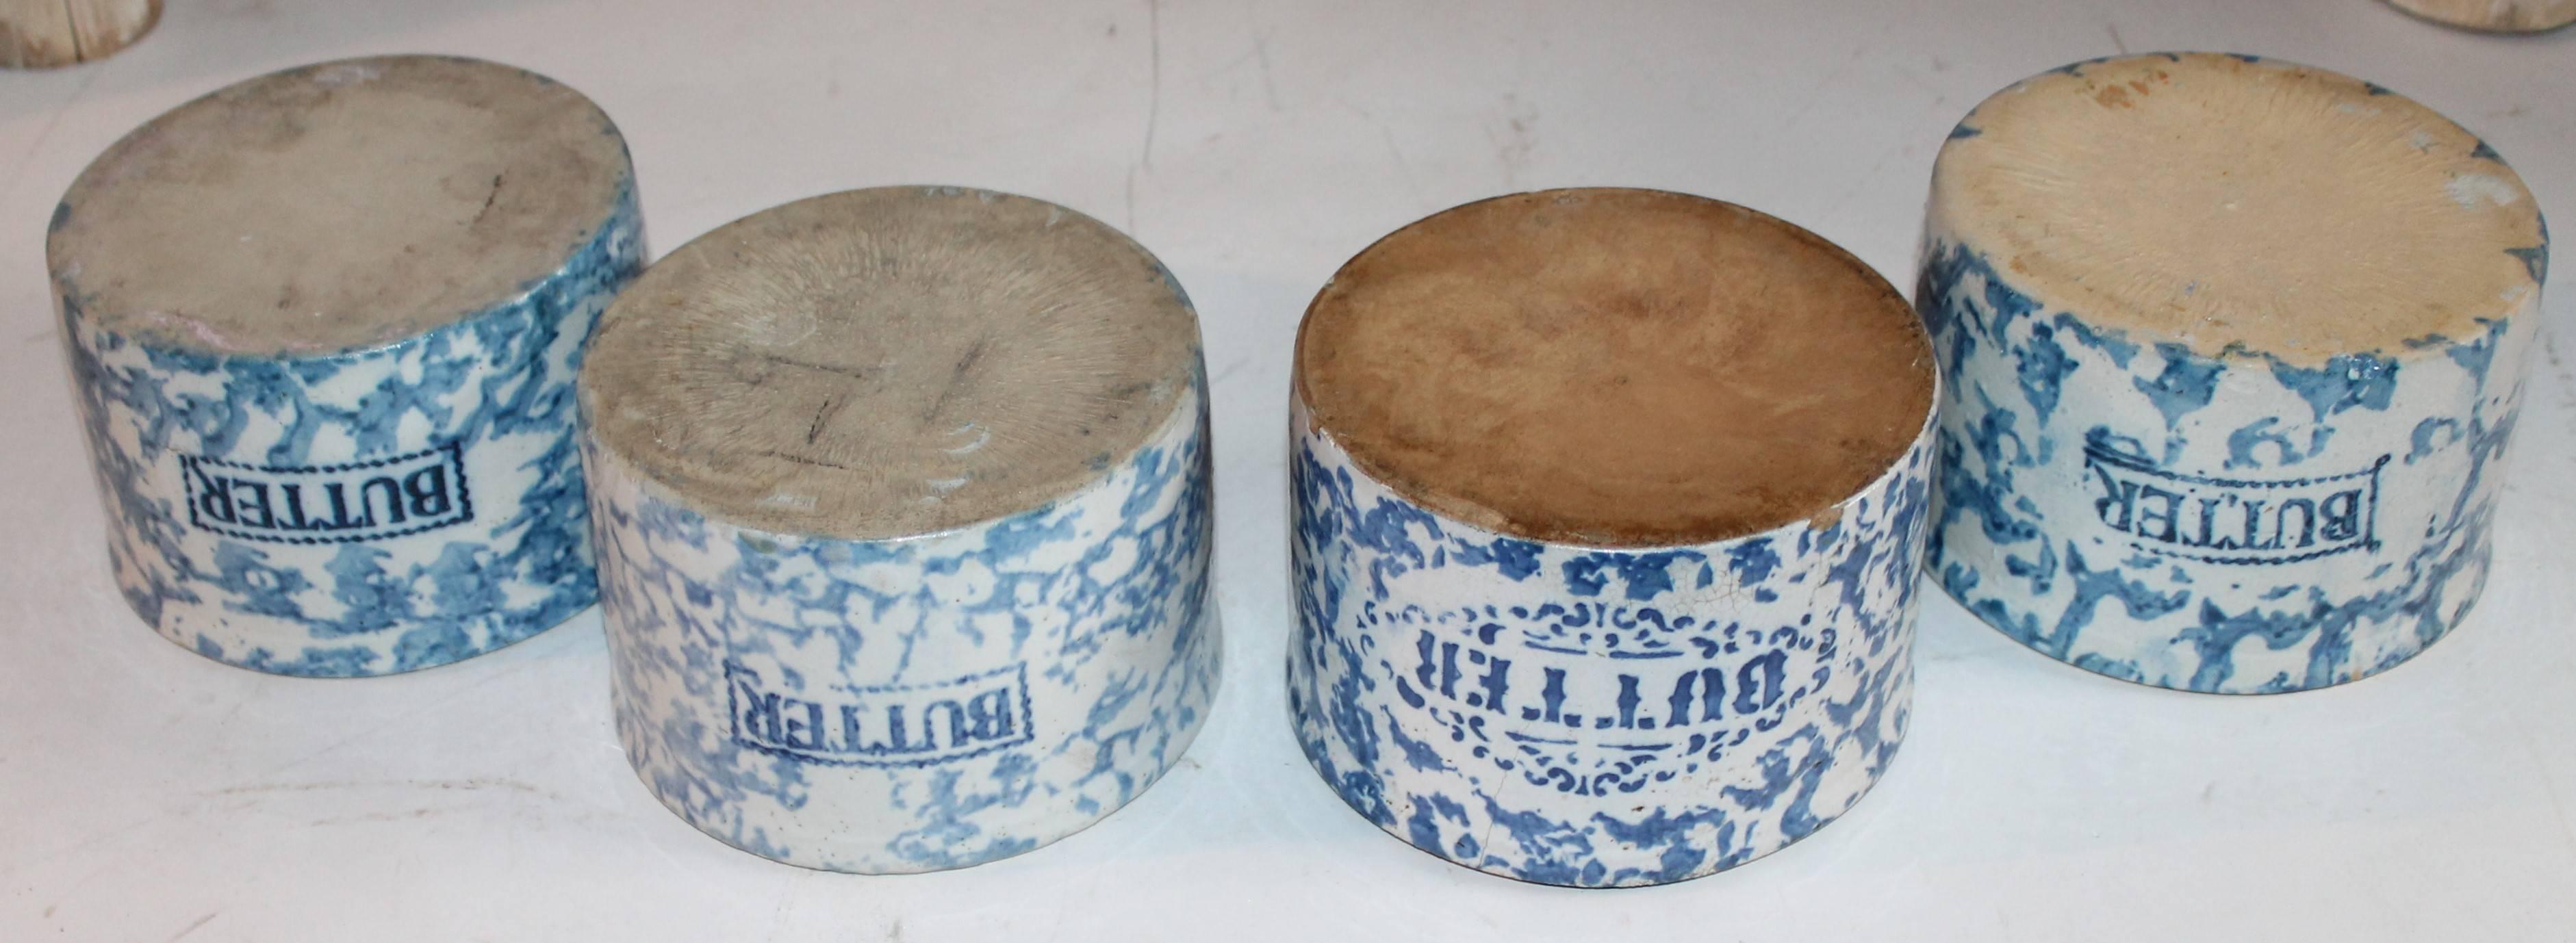 Hand-Painted 19th Century Sponge Ware Butter Crocks / Collection of Four For Sale